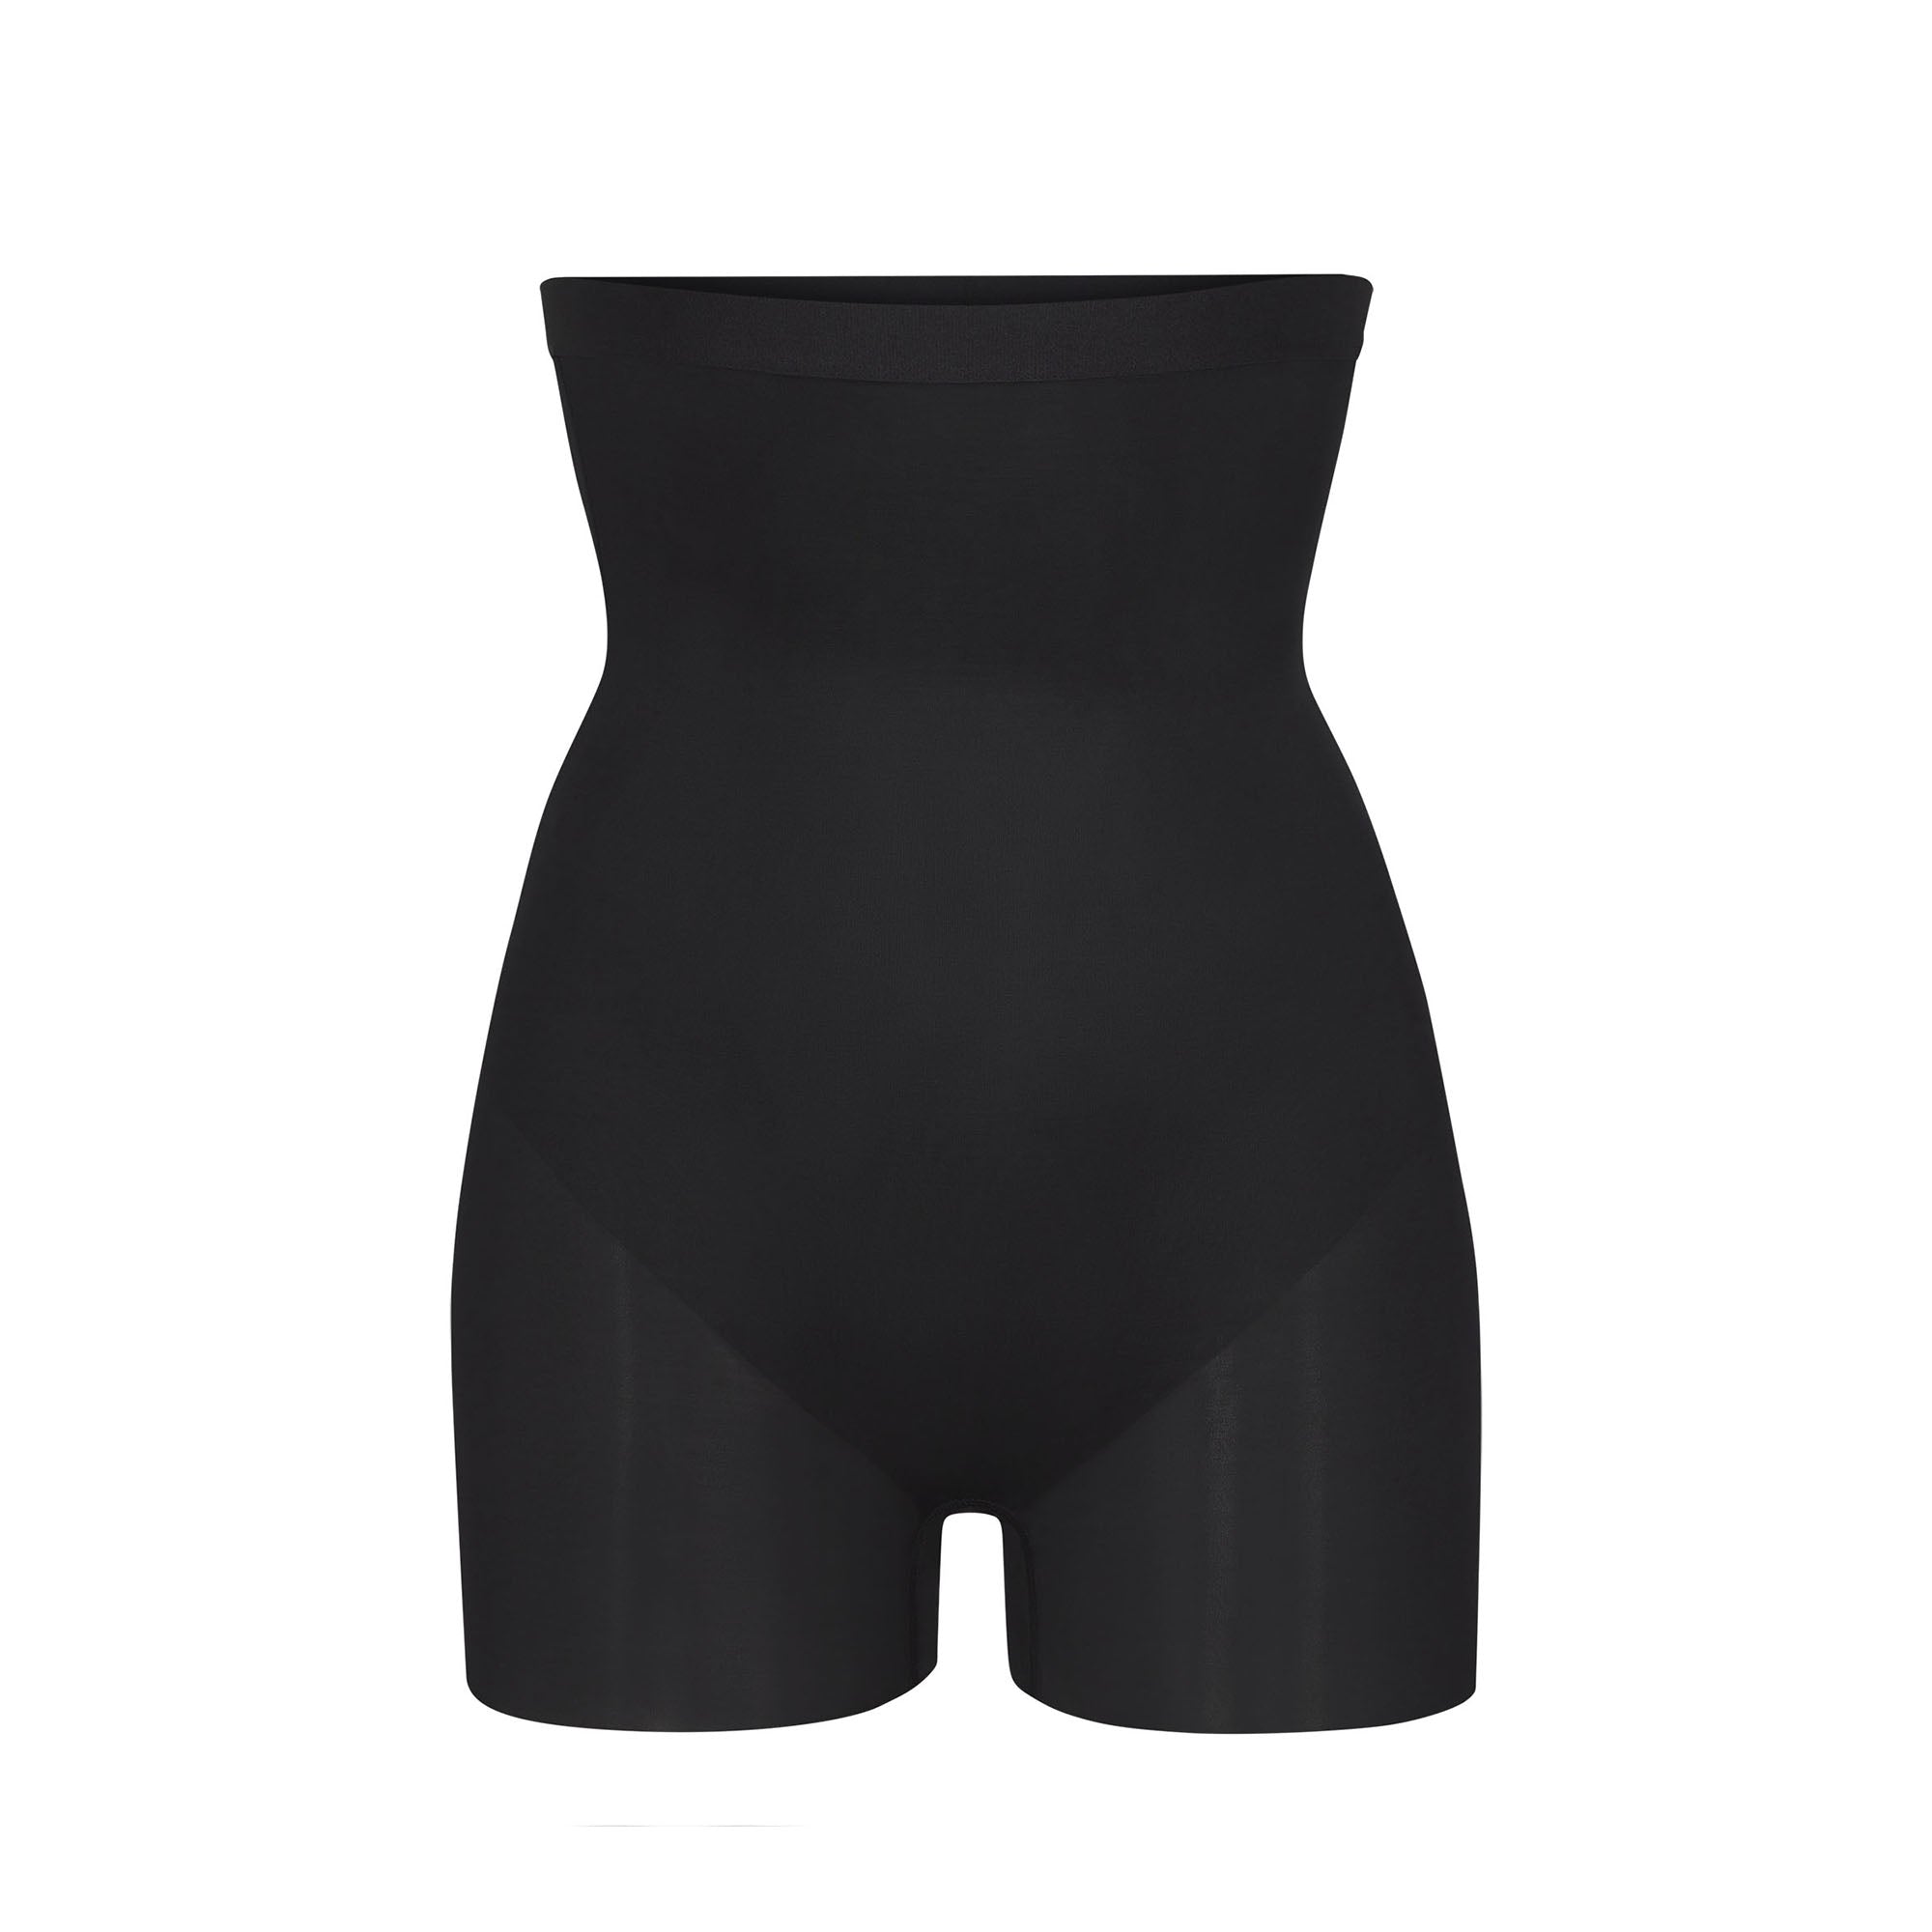 SKIMS Barely There High-waist Shortie - Black